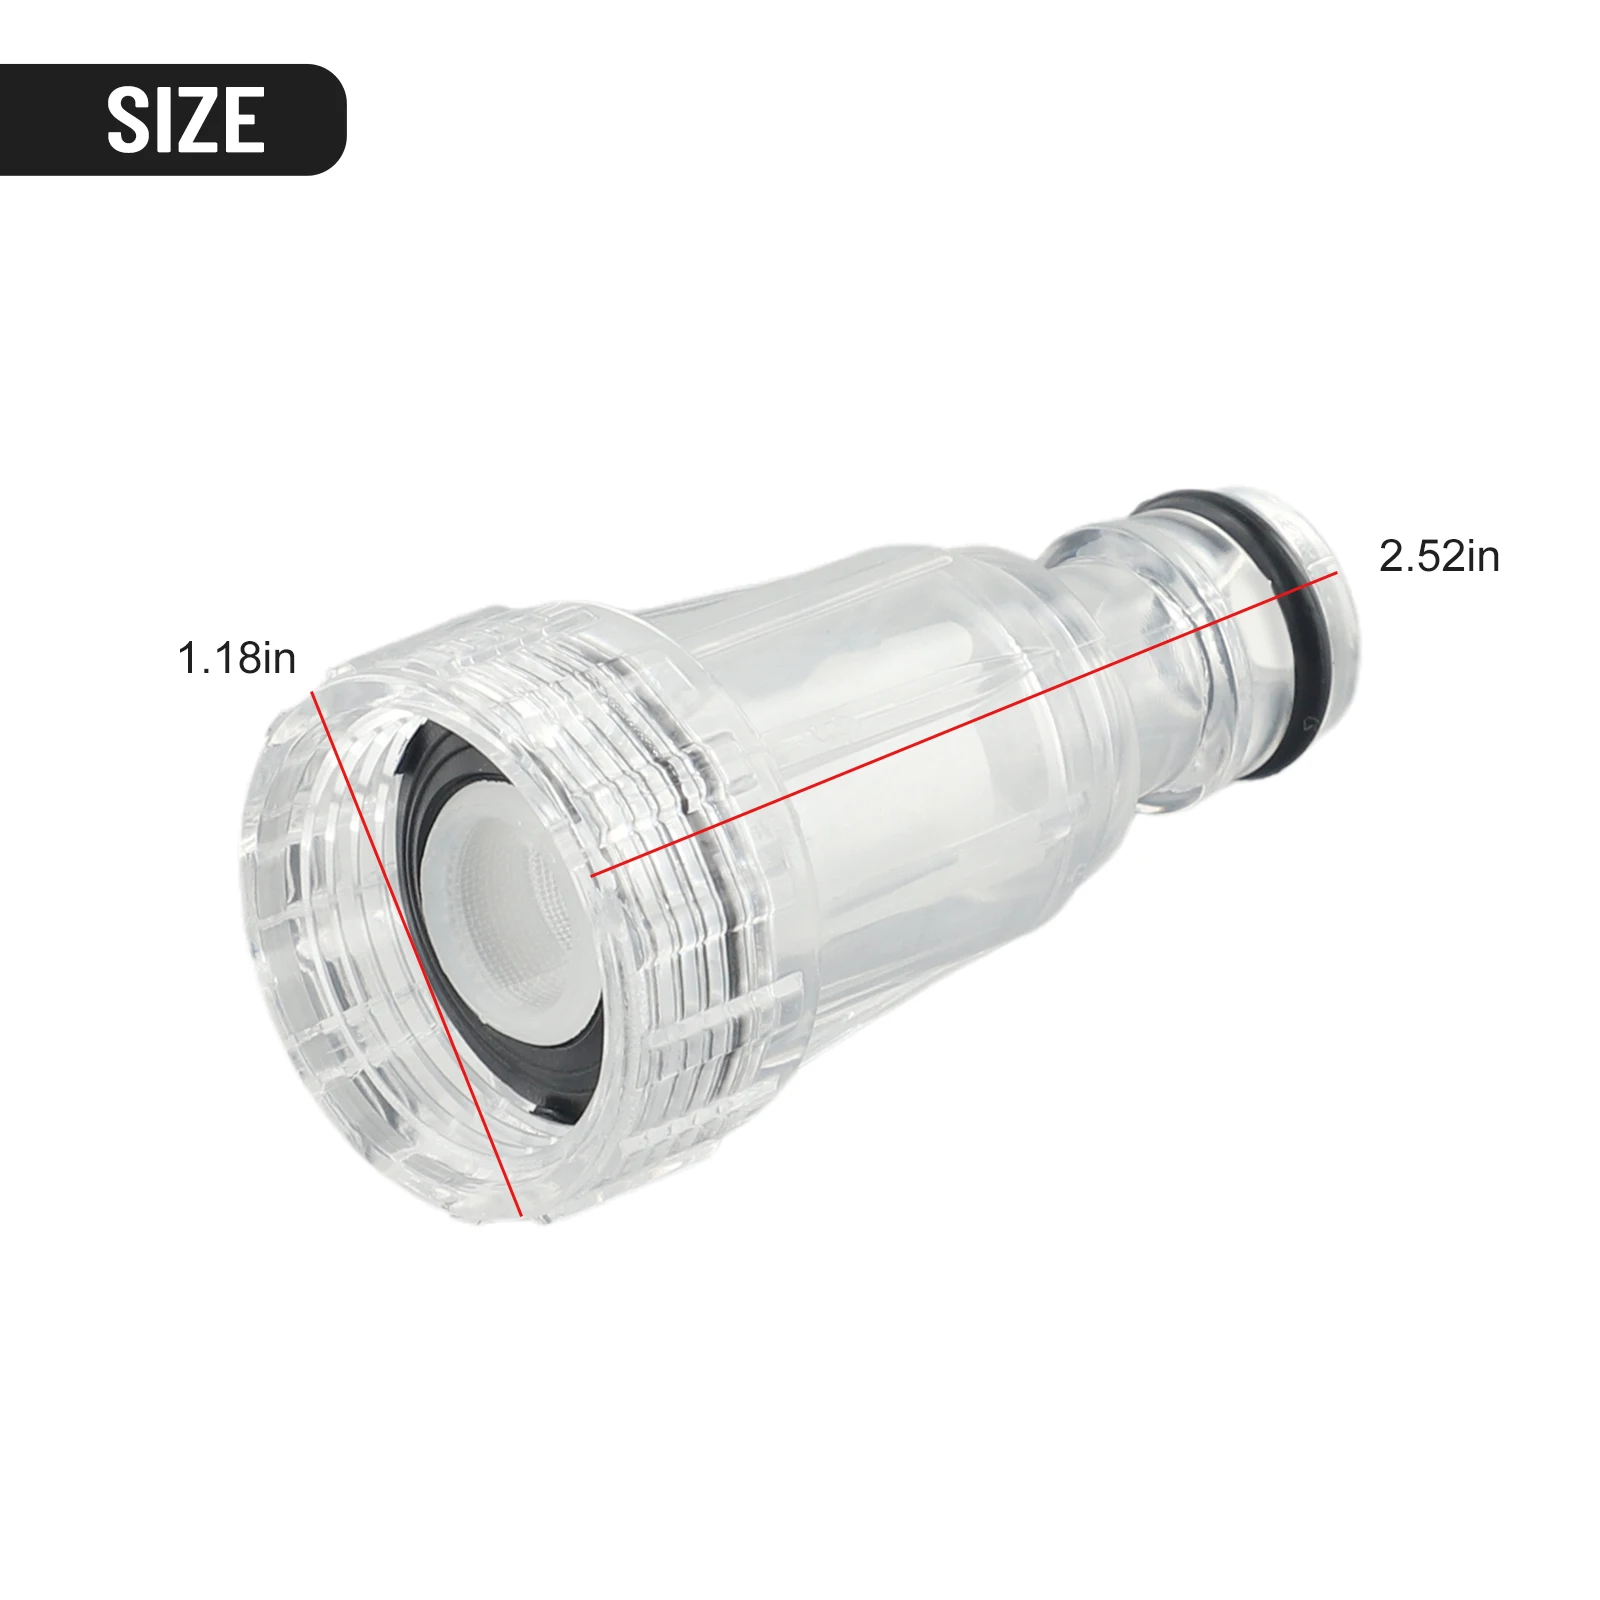 1pcs High Pressure Connection Filter+2pcs Nets For For Karcher K2-K7 Series Washer Garden Pipe Hose Adapter  Pressure Washers filters pressure washer hose filter garden suction hose filter suction strainer for 280 380 intake hose gardening accesorries